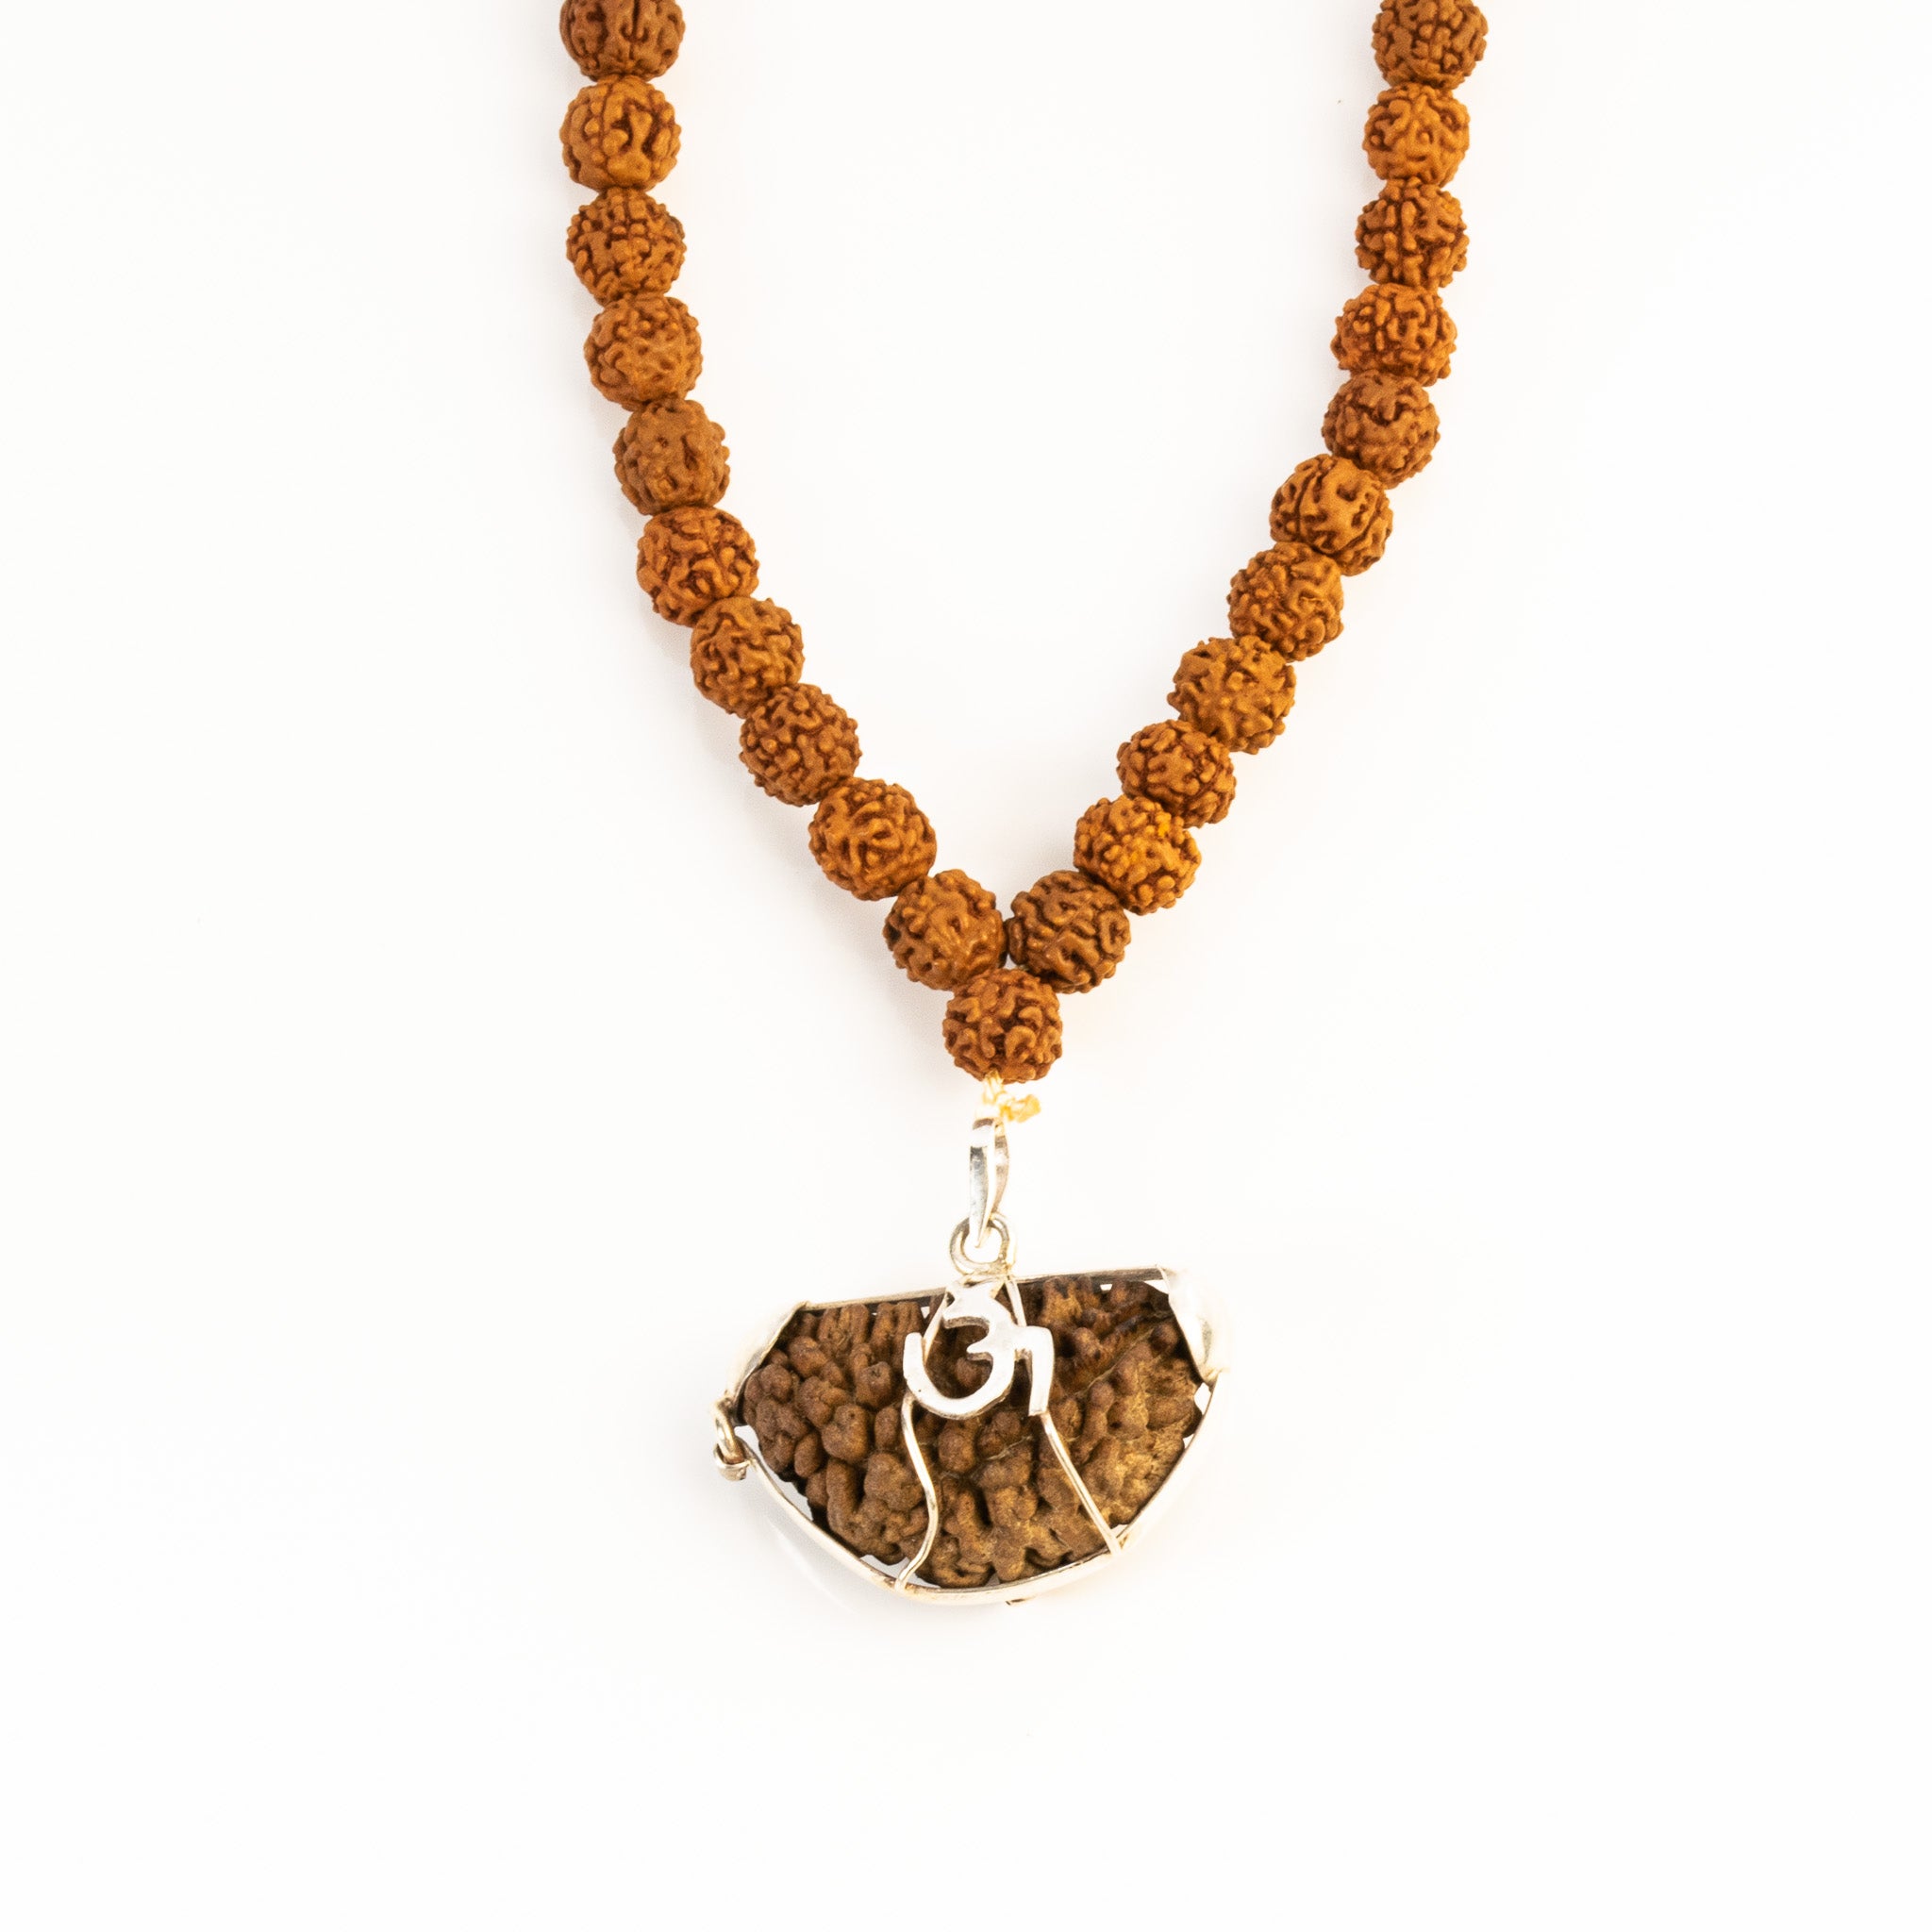 Certified 1 Mukhi Rudraksha with 5 Mukhi Mala 108 beads for growth and success